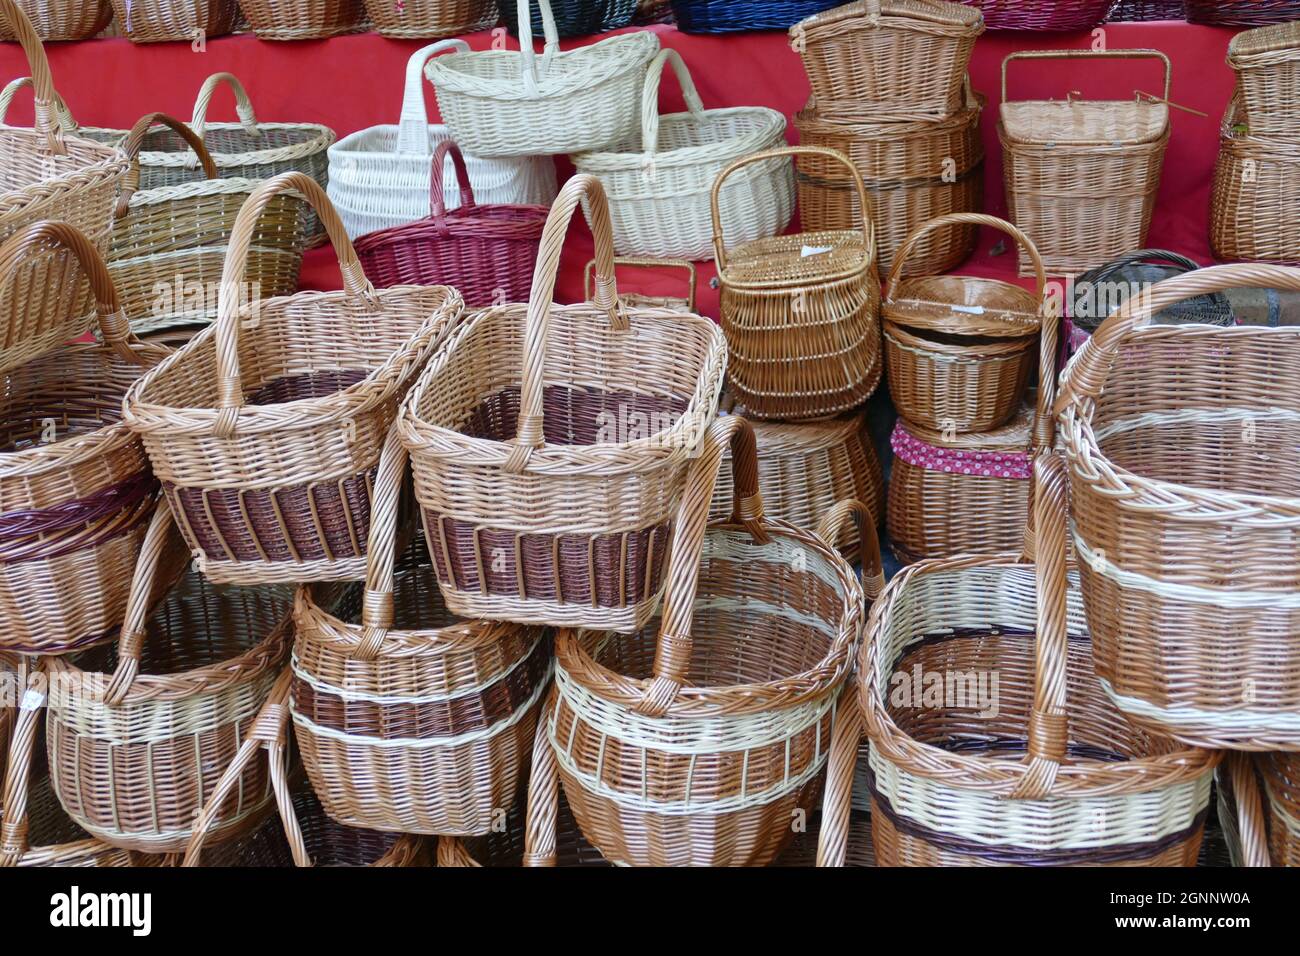 Wicker work baskets on a market, sustainable bags, cases, products from sudamerica. Stock Photo